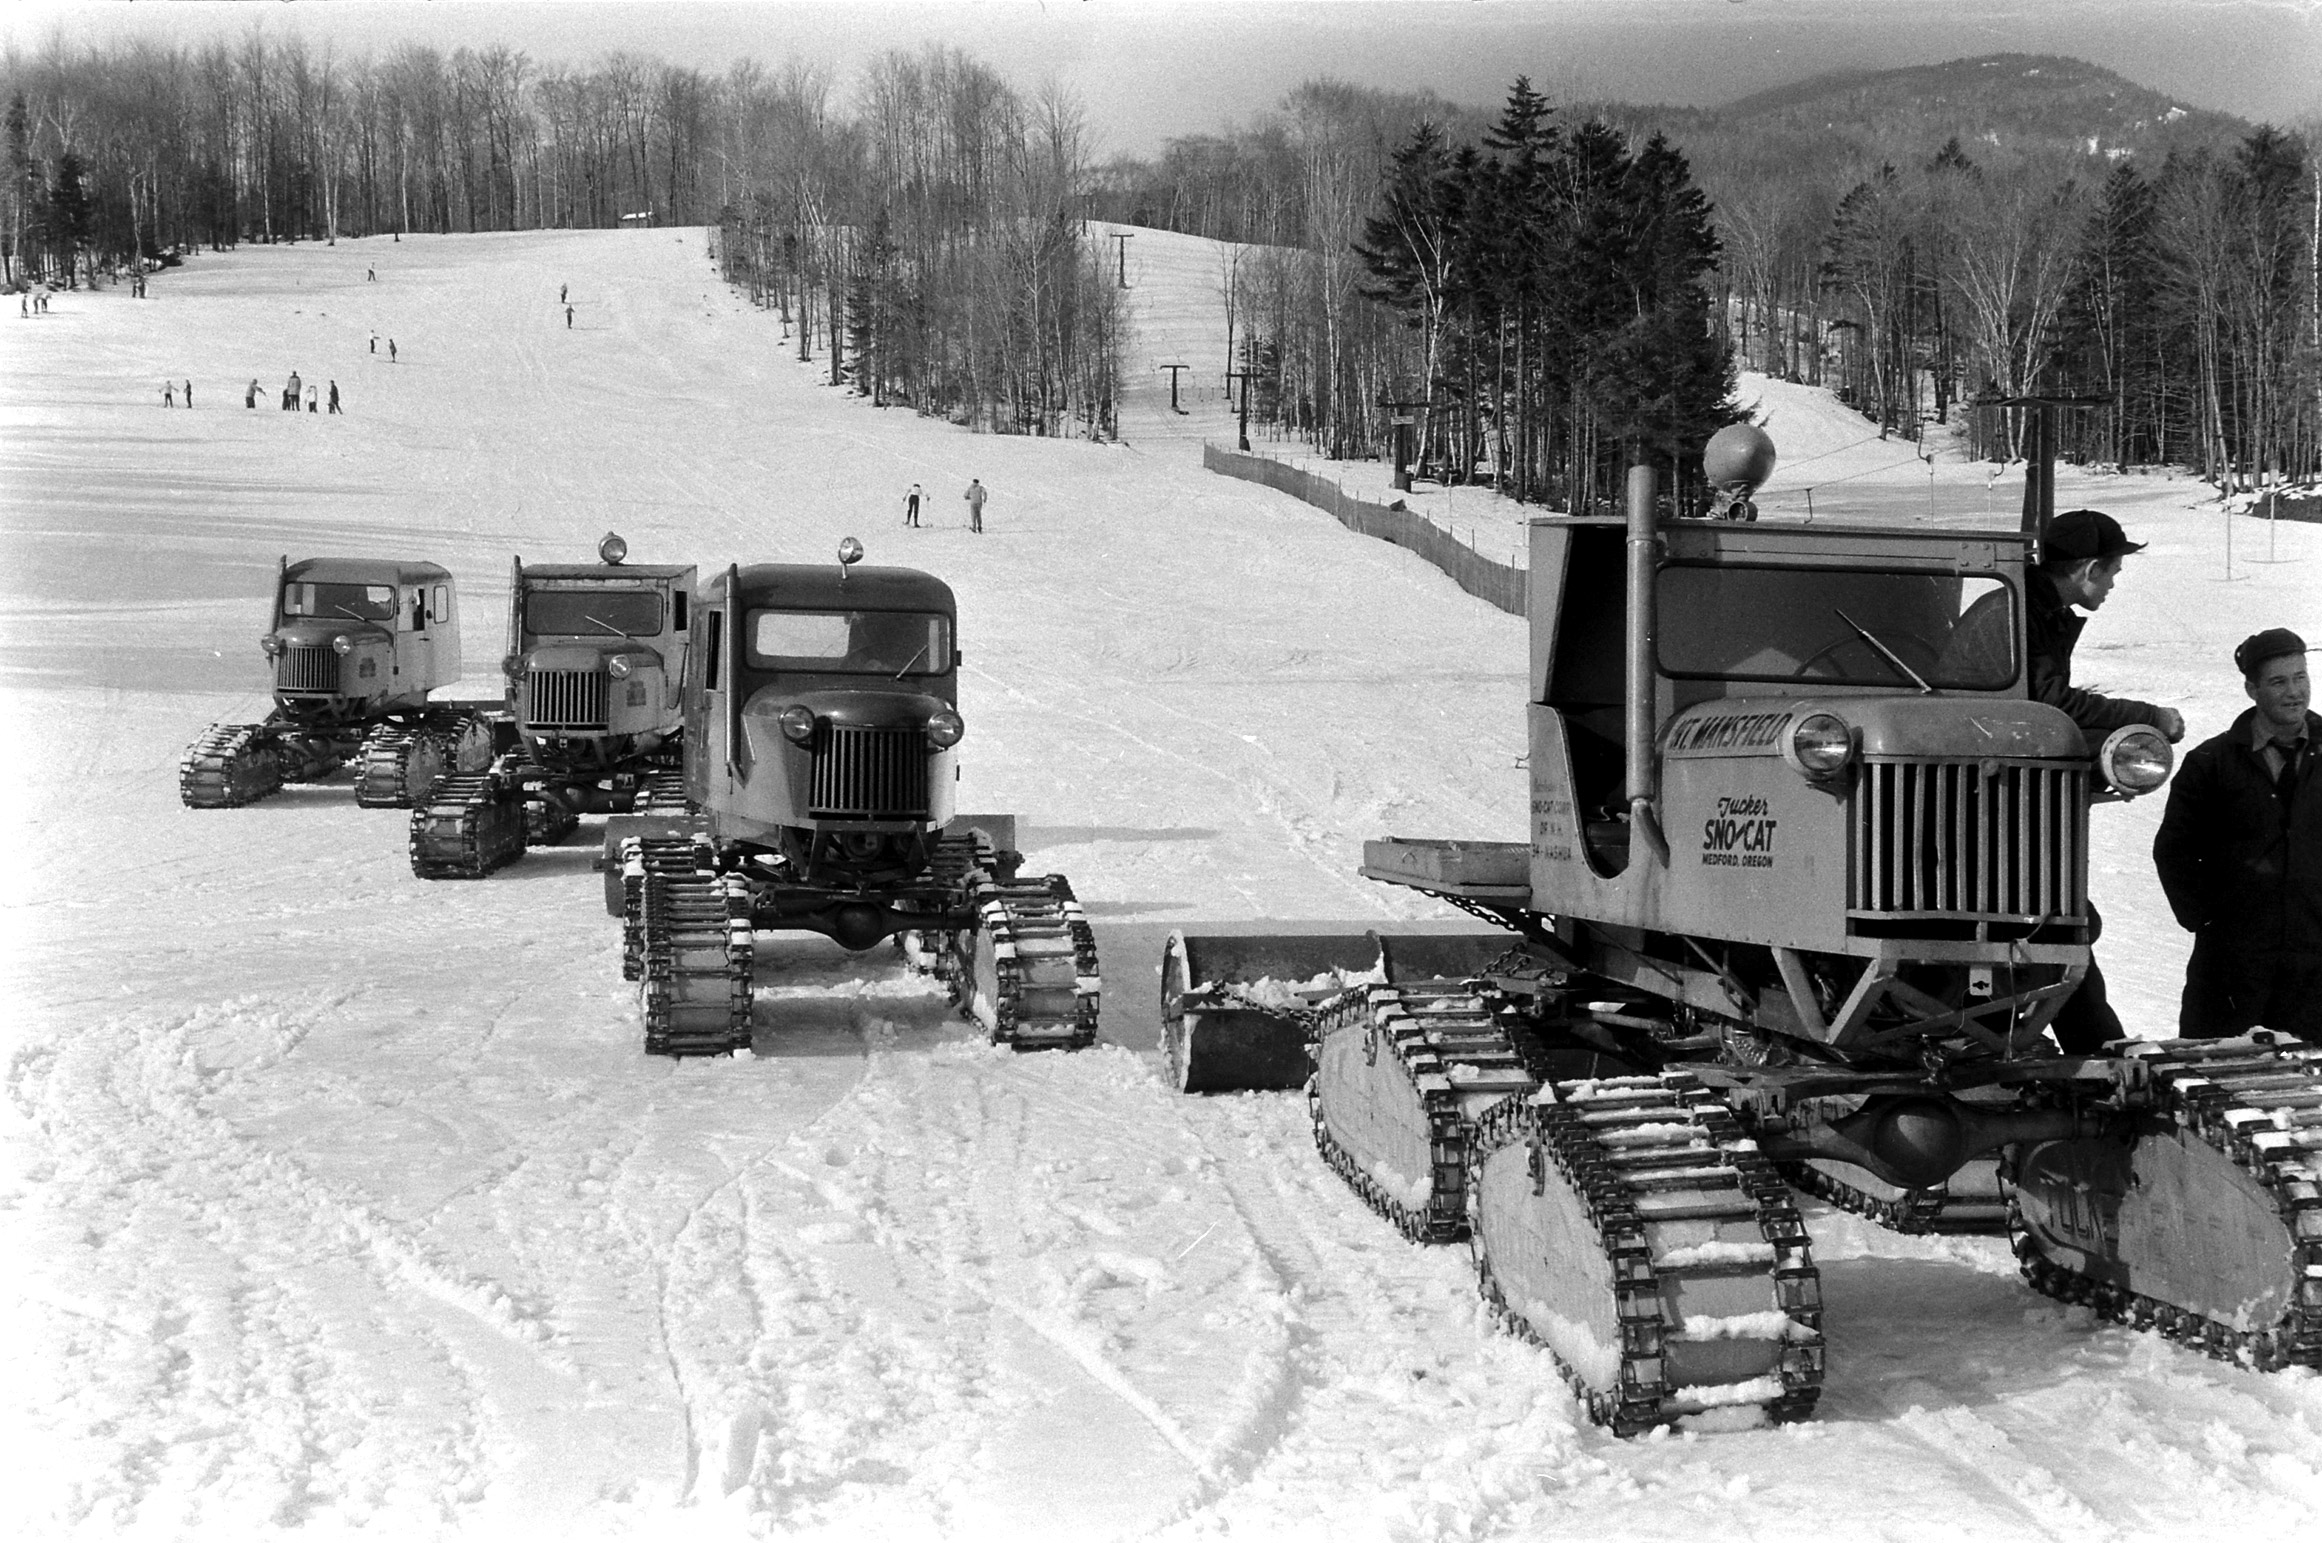 Skiing Boom in the Stowe area of Vermont, 1957.